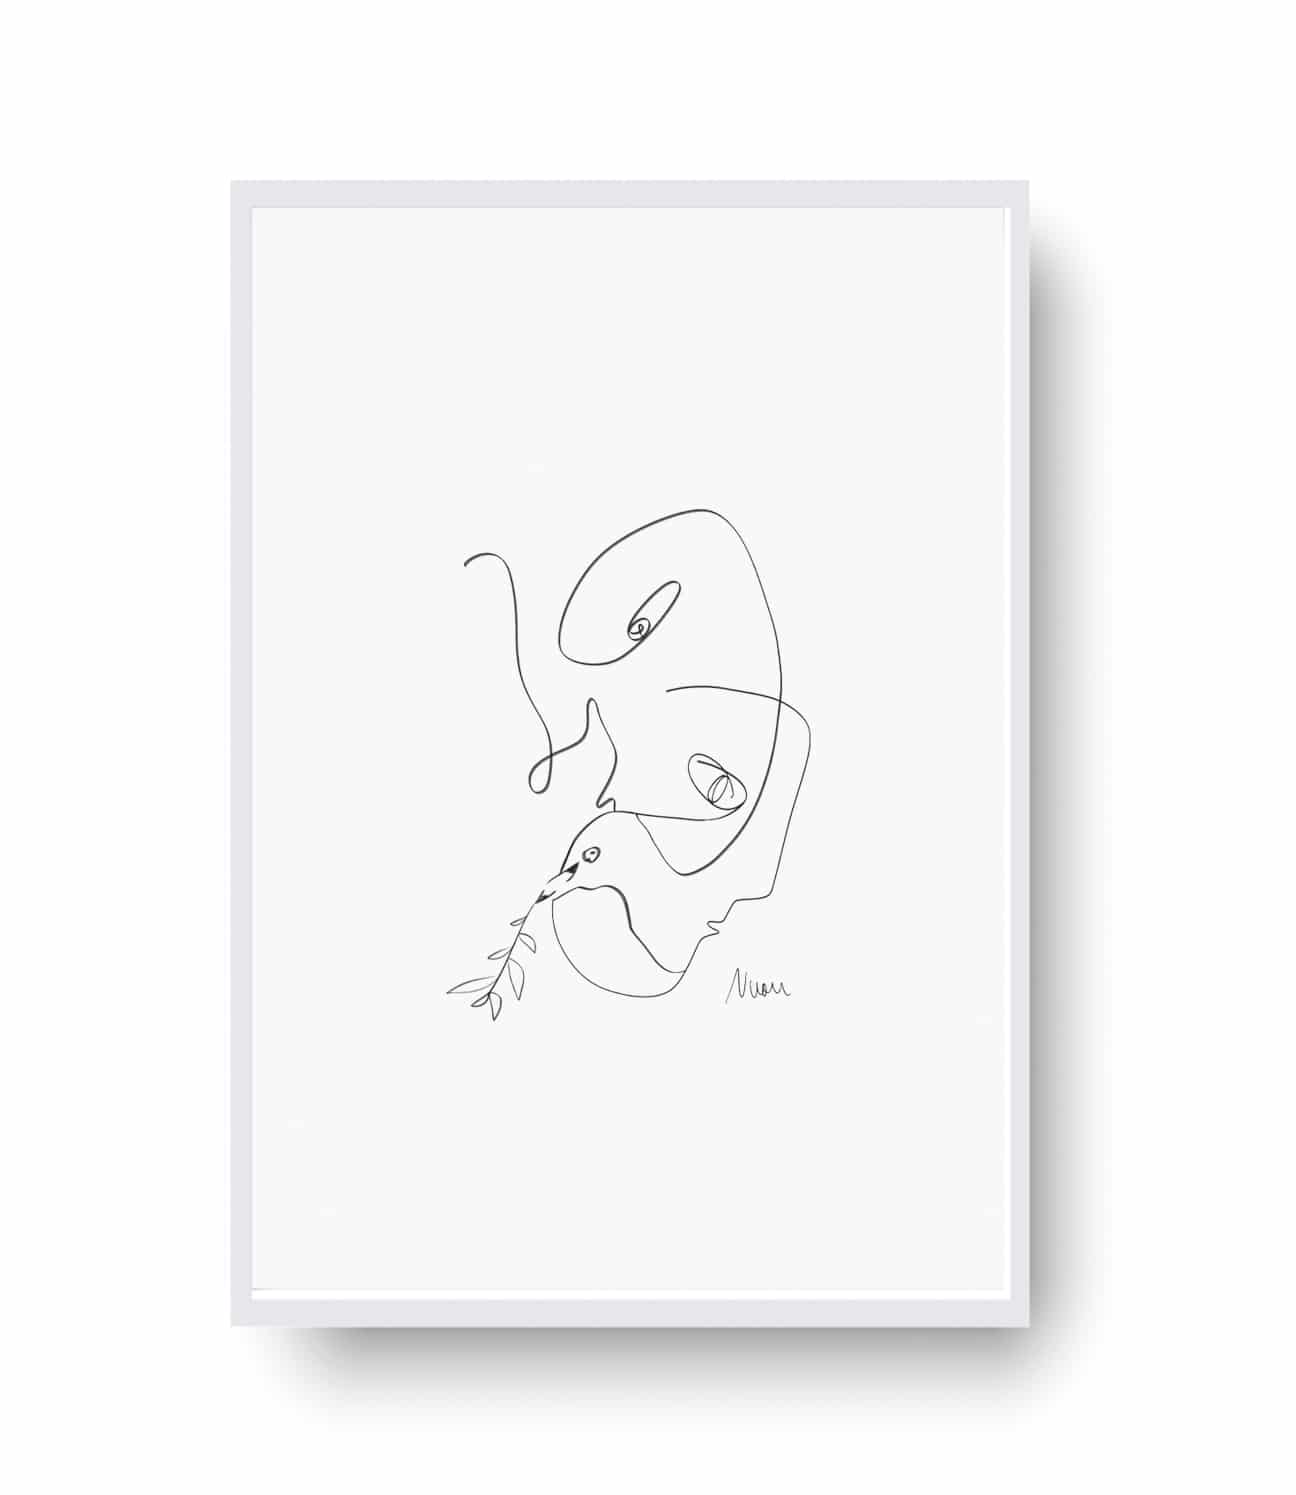 Parlez-vous la Paix? is part of a modern triptych inspired by Picasso's famous 'Dove of Peace'. ⁠The main subject of this series is to explore the relatedness and cognitive abilities in between men and birds.